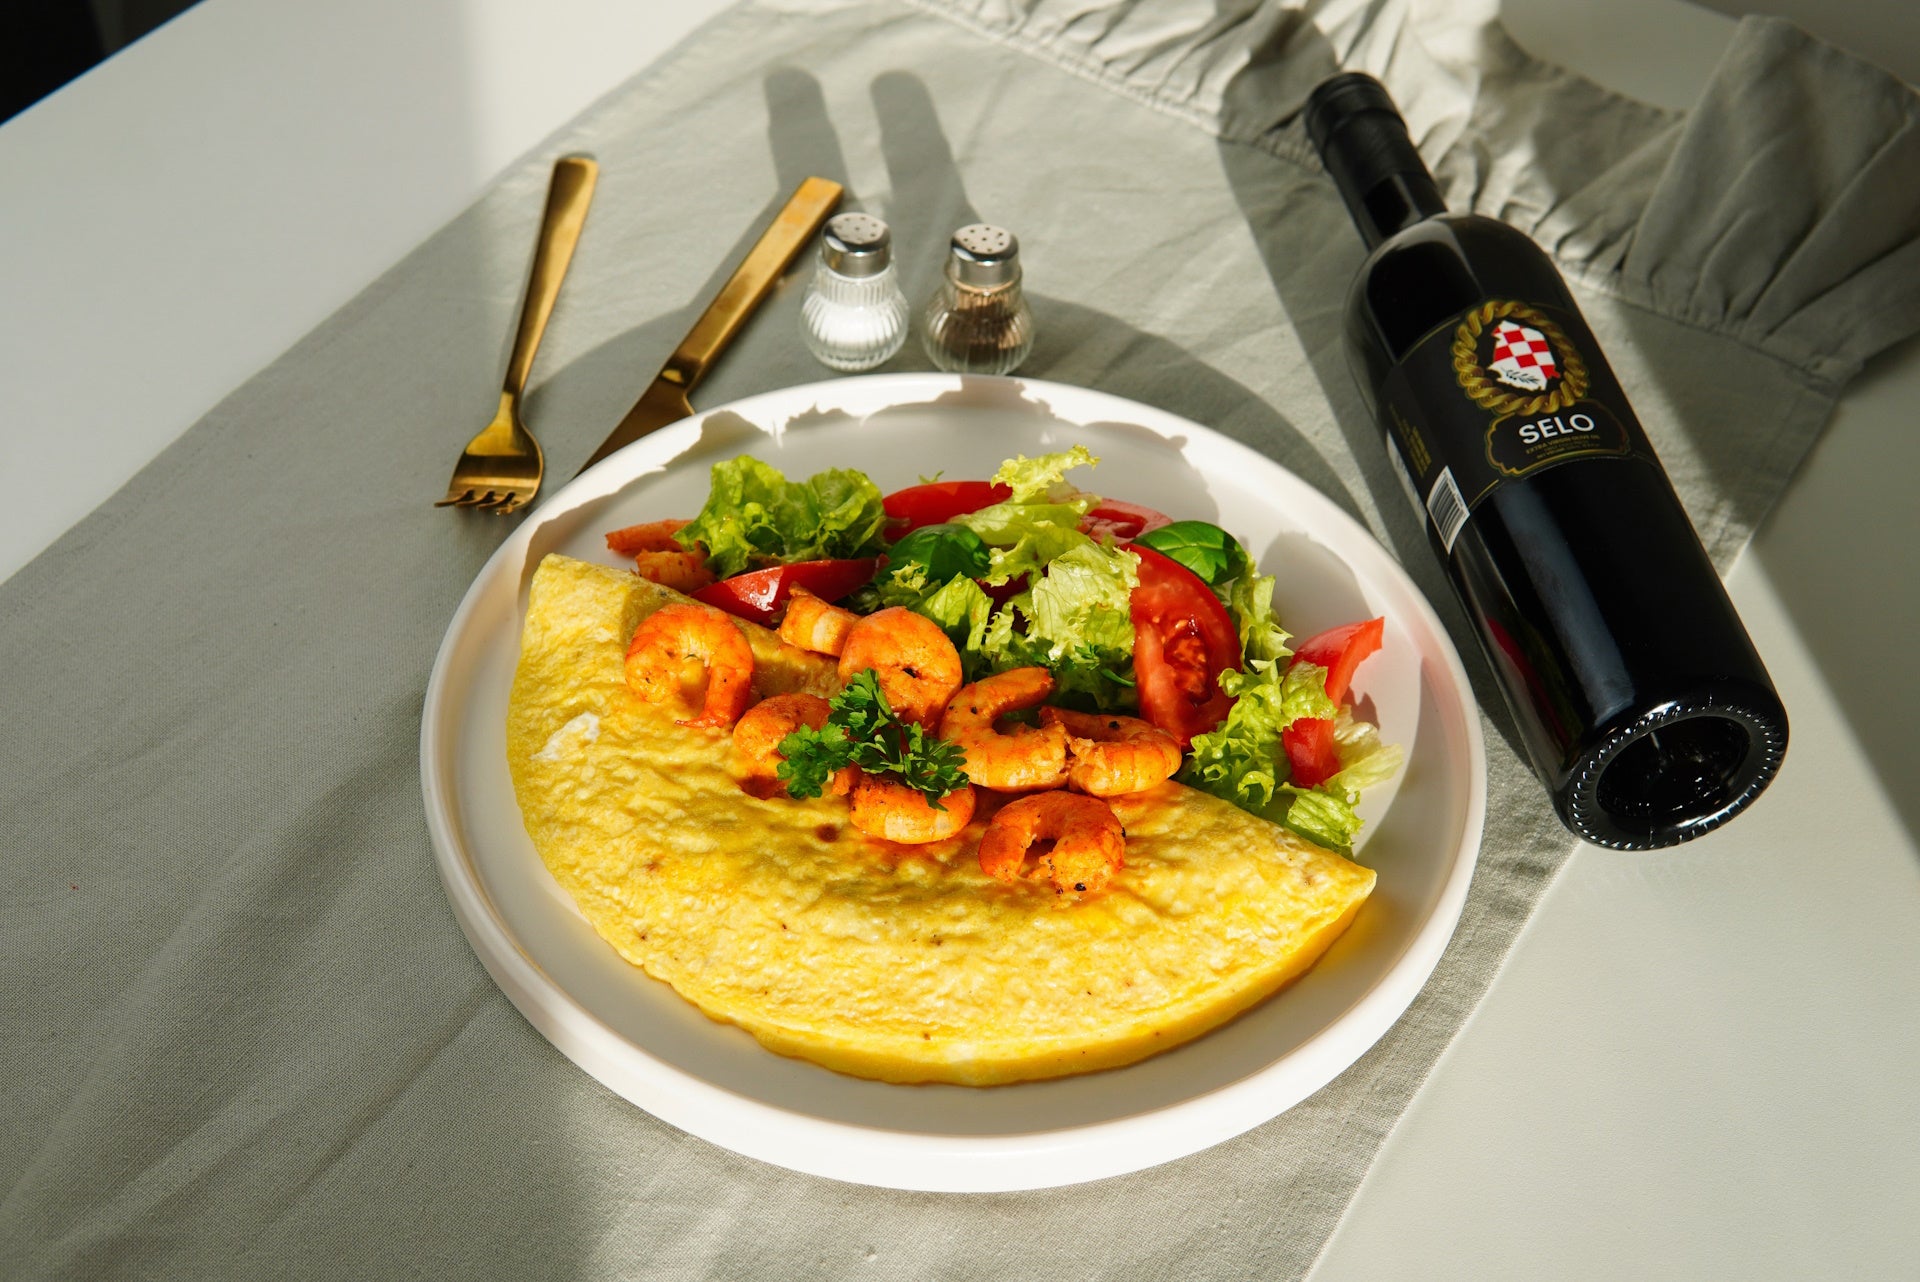 Fluffy omelette with succulent shrimp, drizzled with Croatian olive oil for a rich flavor.